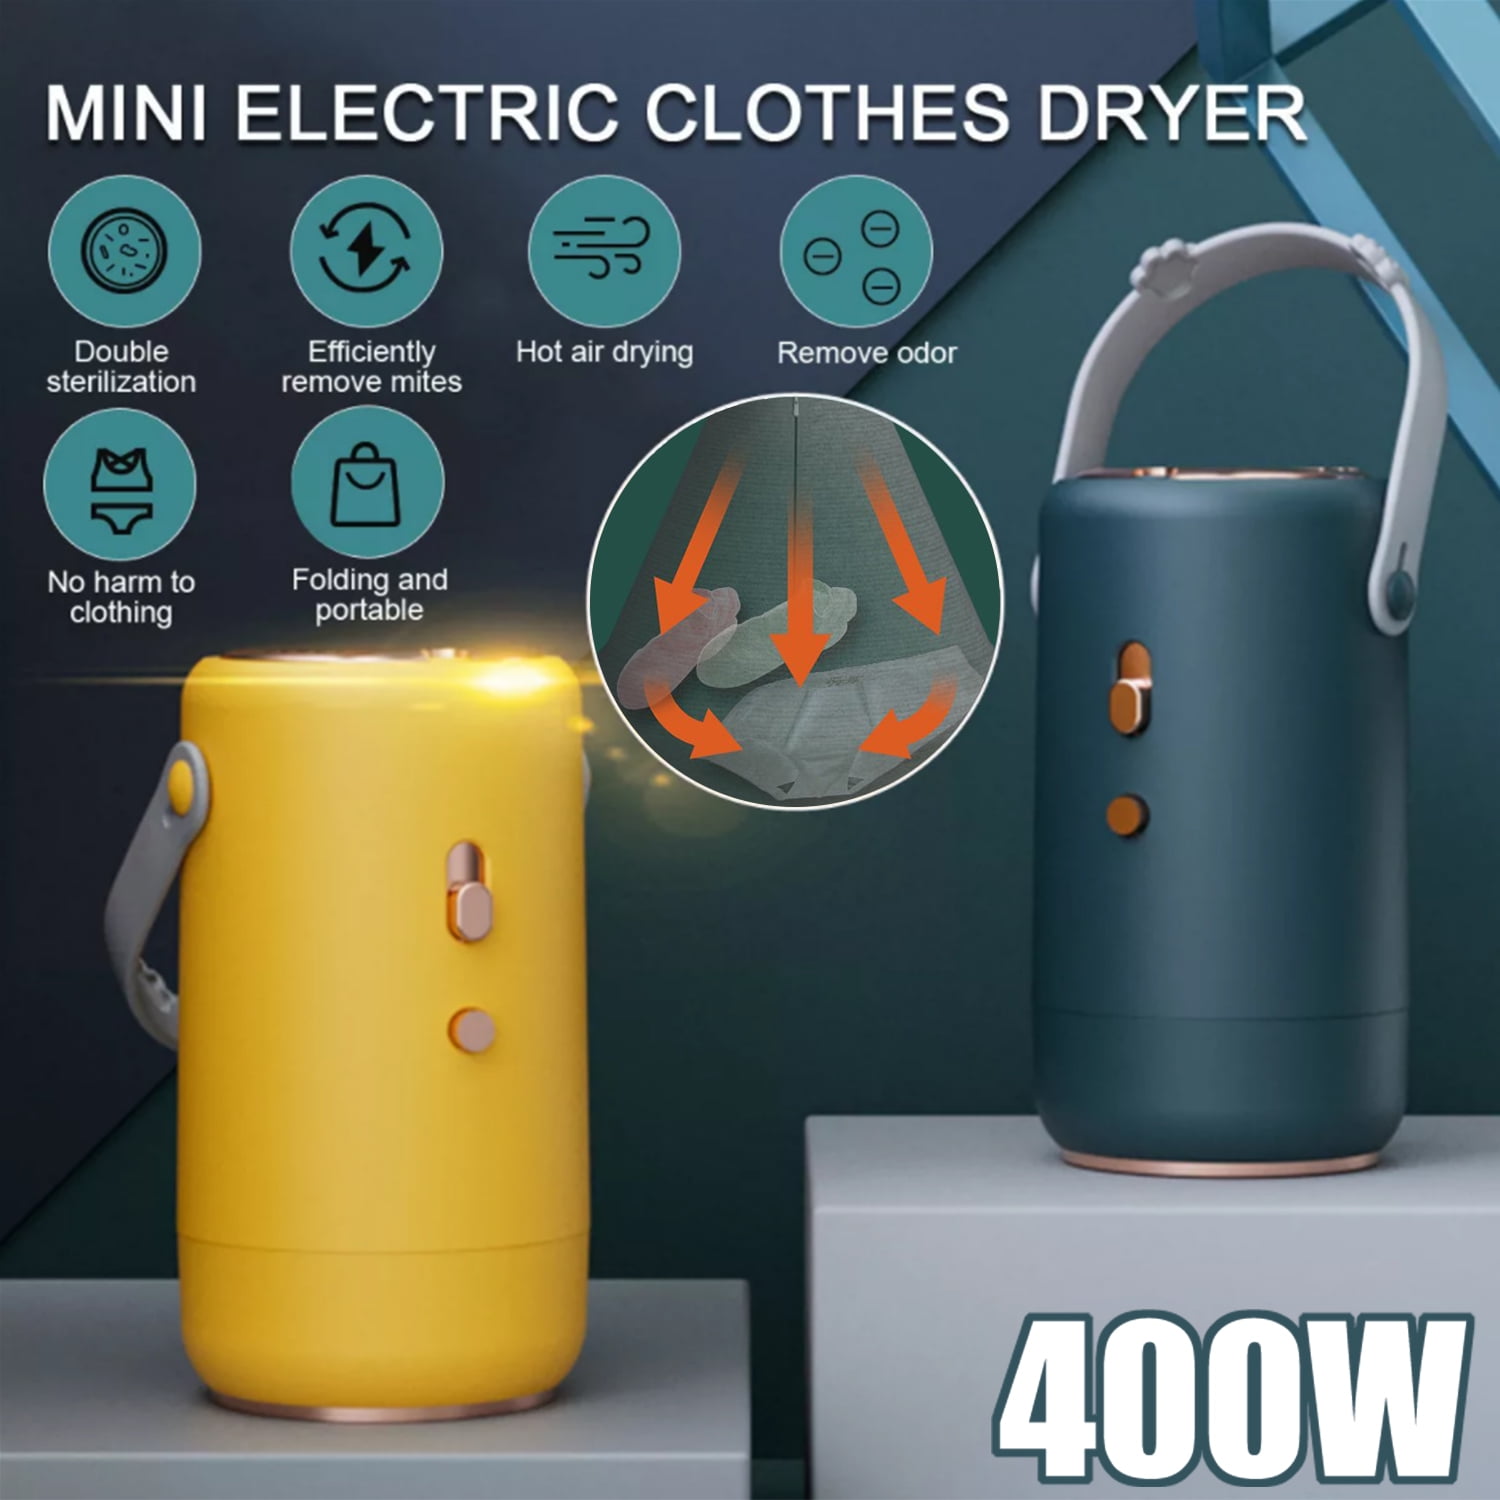  Mojoco Portable Clothes Dryer - Portable Dryer for